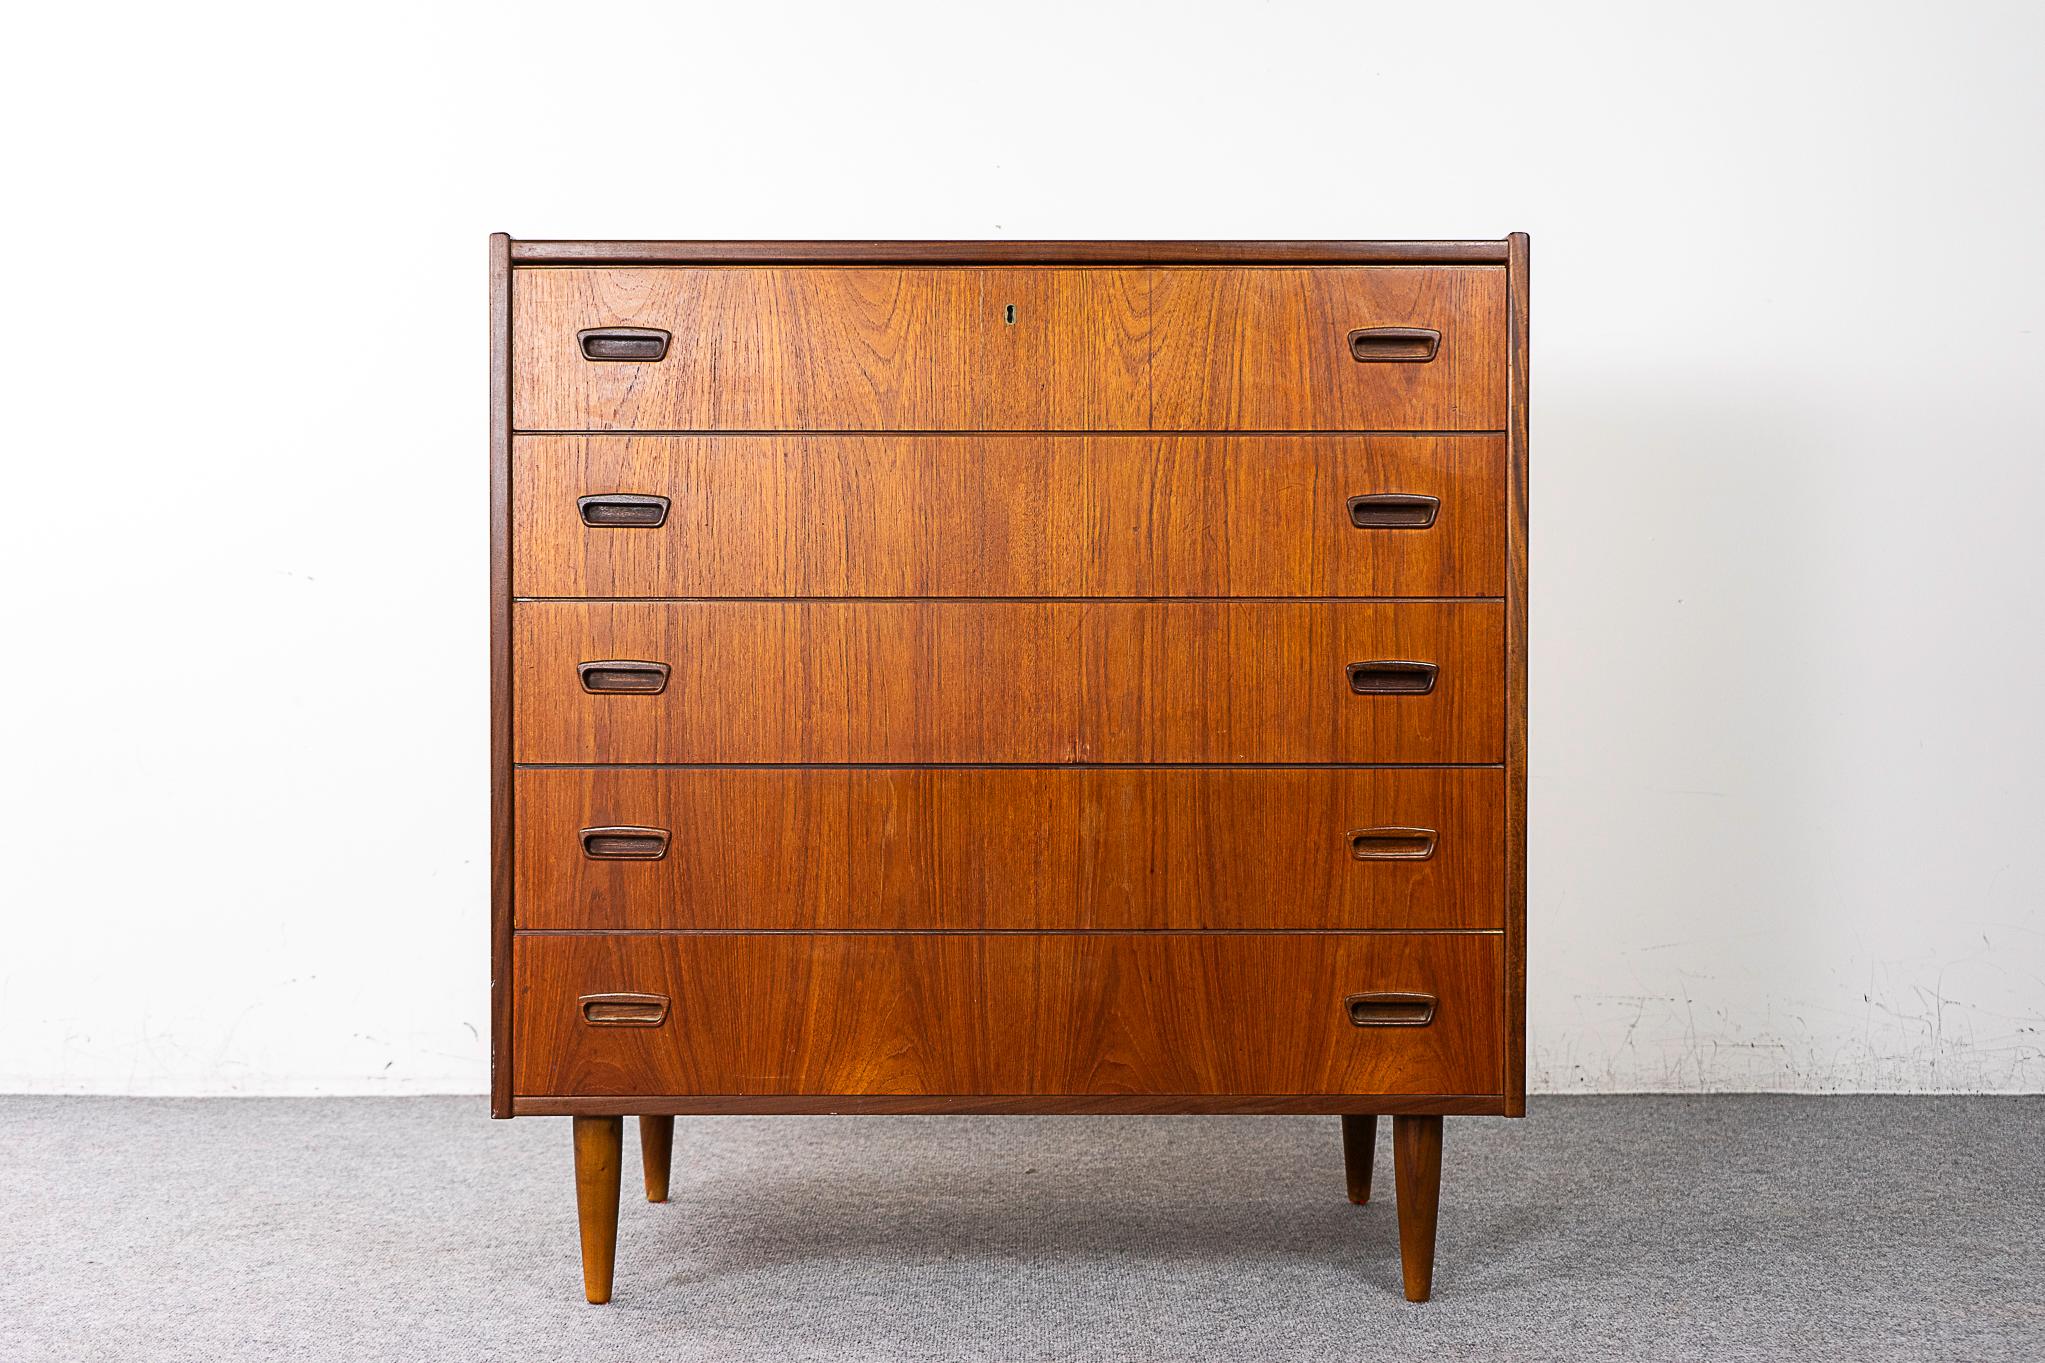 Teak Danish dresser, circa 1960's. A combination of solid wood edging and lovely book-matched veneer. Beautiful grain patterns the drawer faces, along with quality dovetail construction! Sleek tapering solid legs.

Please inquire for remote and